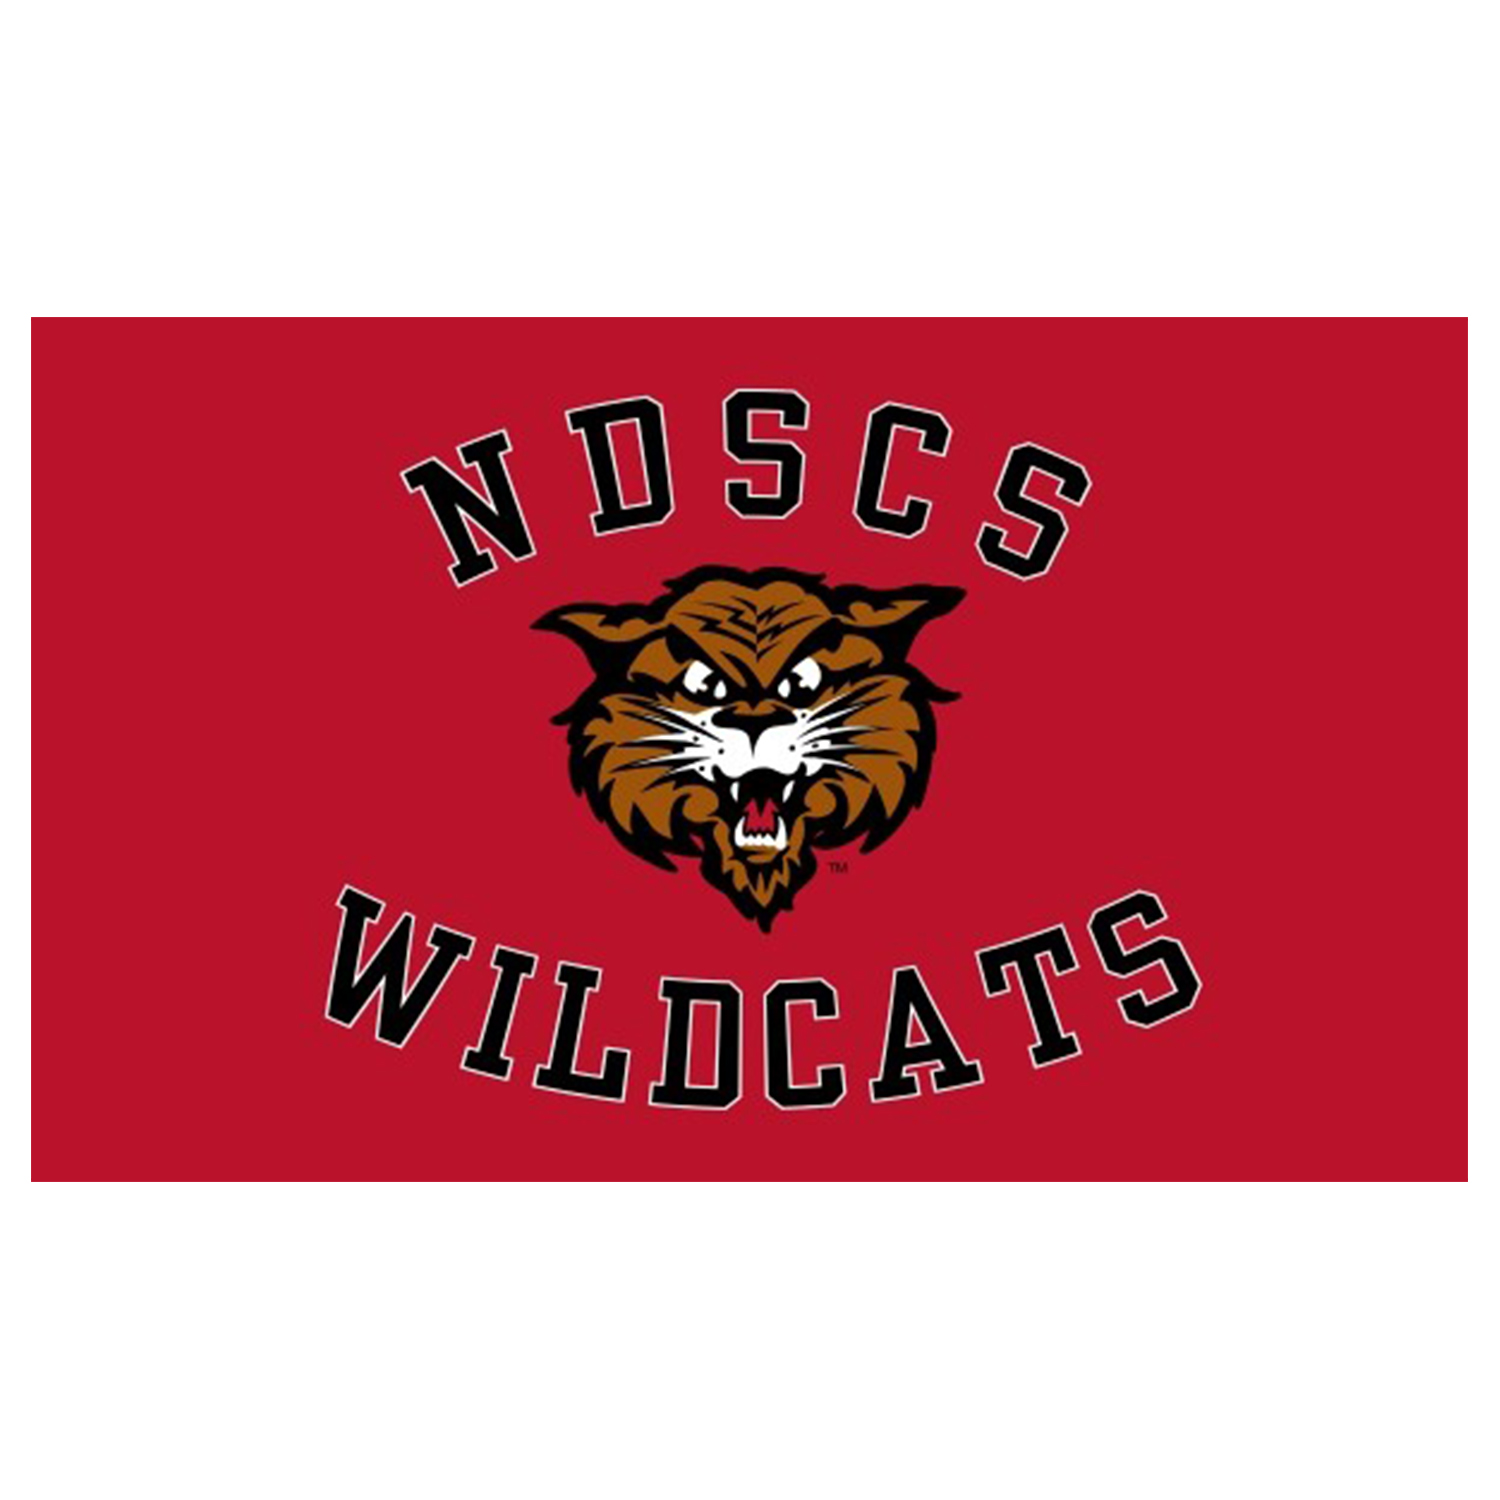 3 X 5 NDSCS Wildcats Flag - by Sewing Concepts 